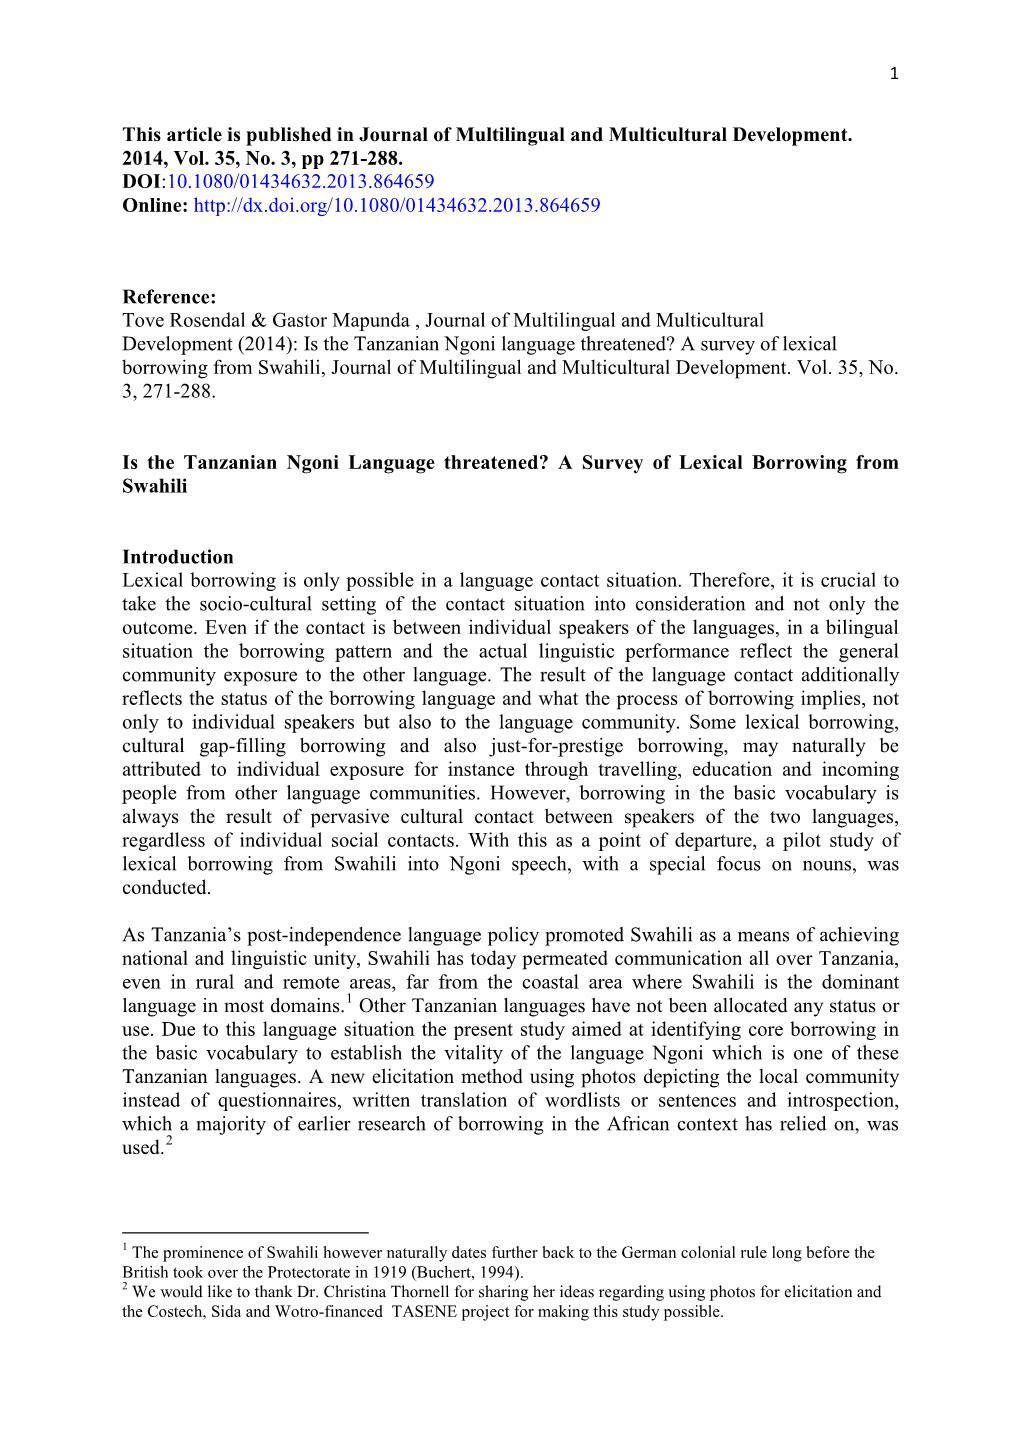 Is the Tanzanian Ngoni Language Threatened? a Survey of Lexical Borrowing from Swahili, Journal of Multilingual and Multicultural Development